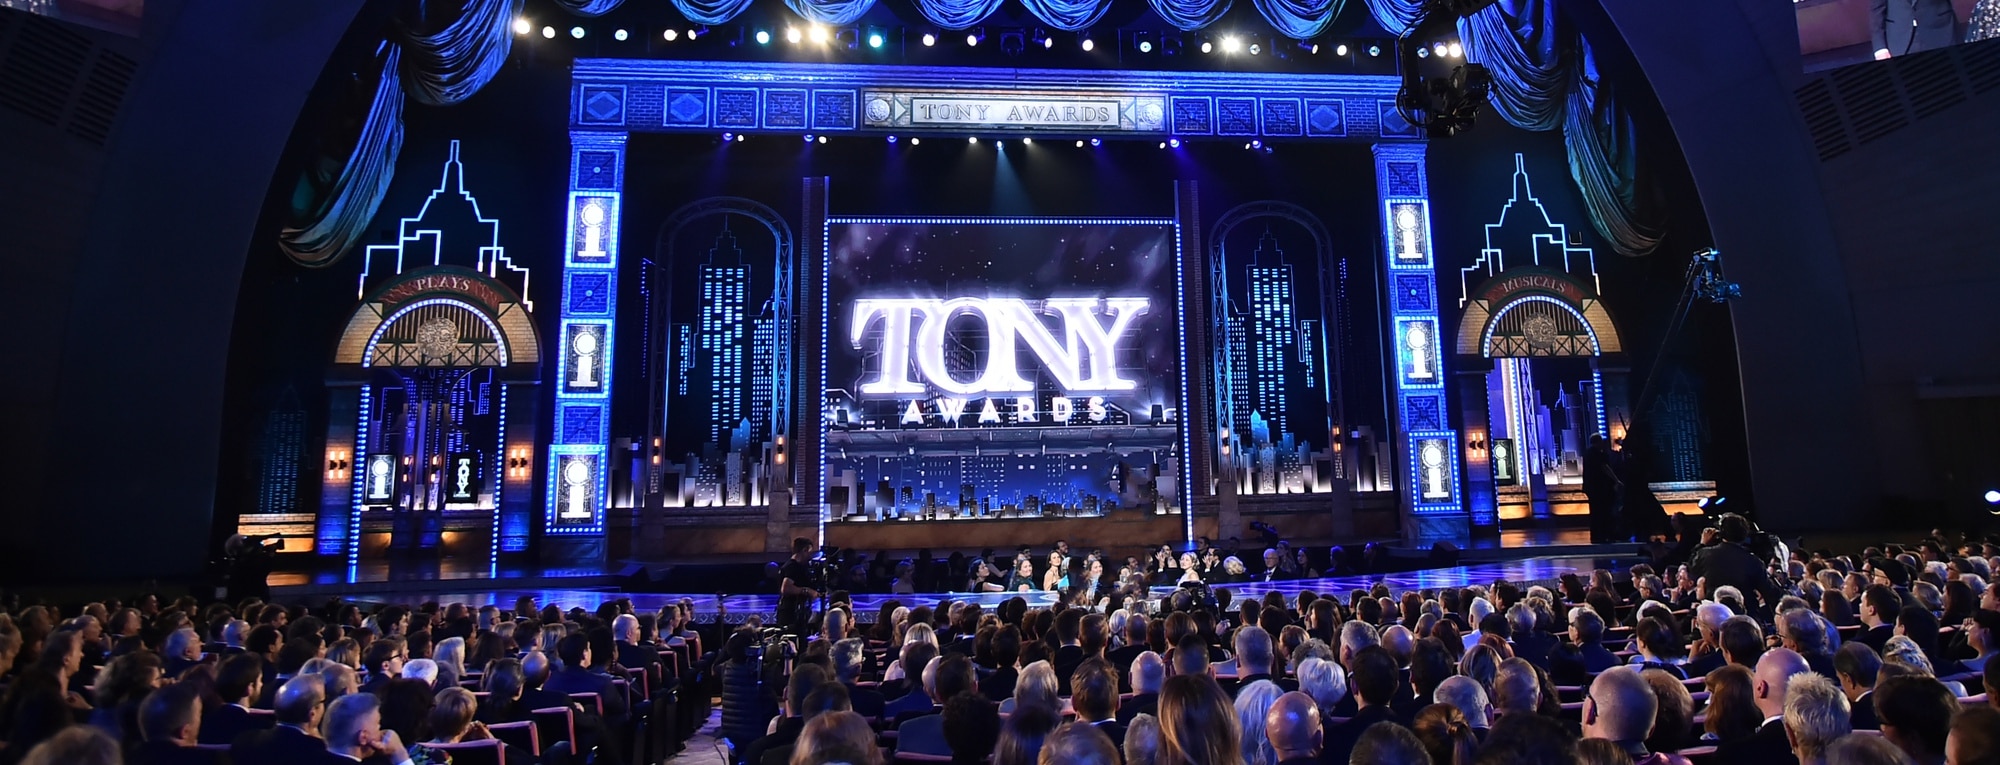 Tony Awards 2020 go online What shows are eligible?